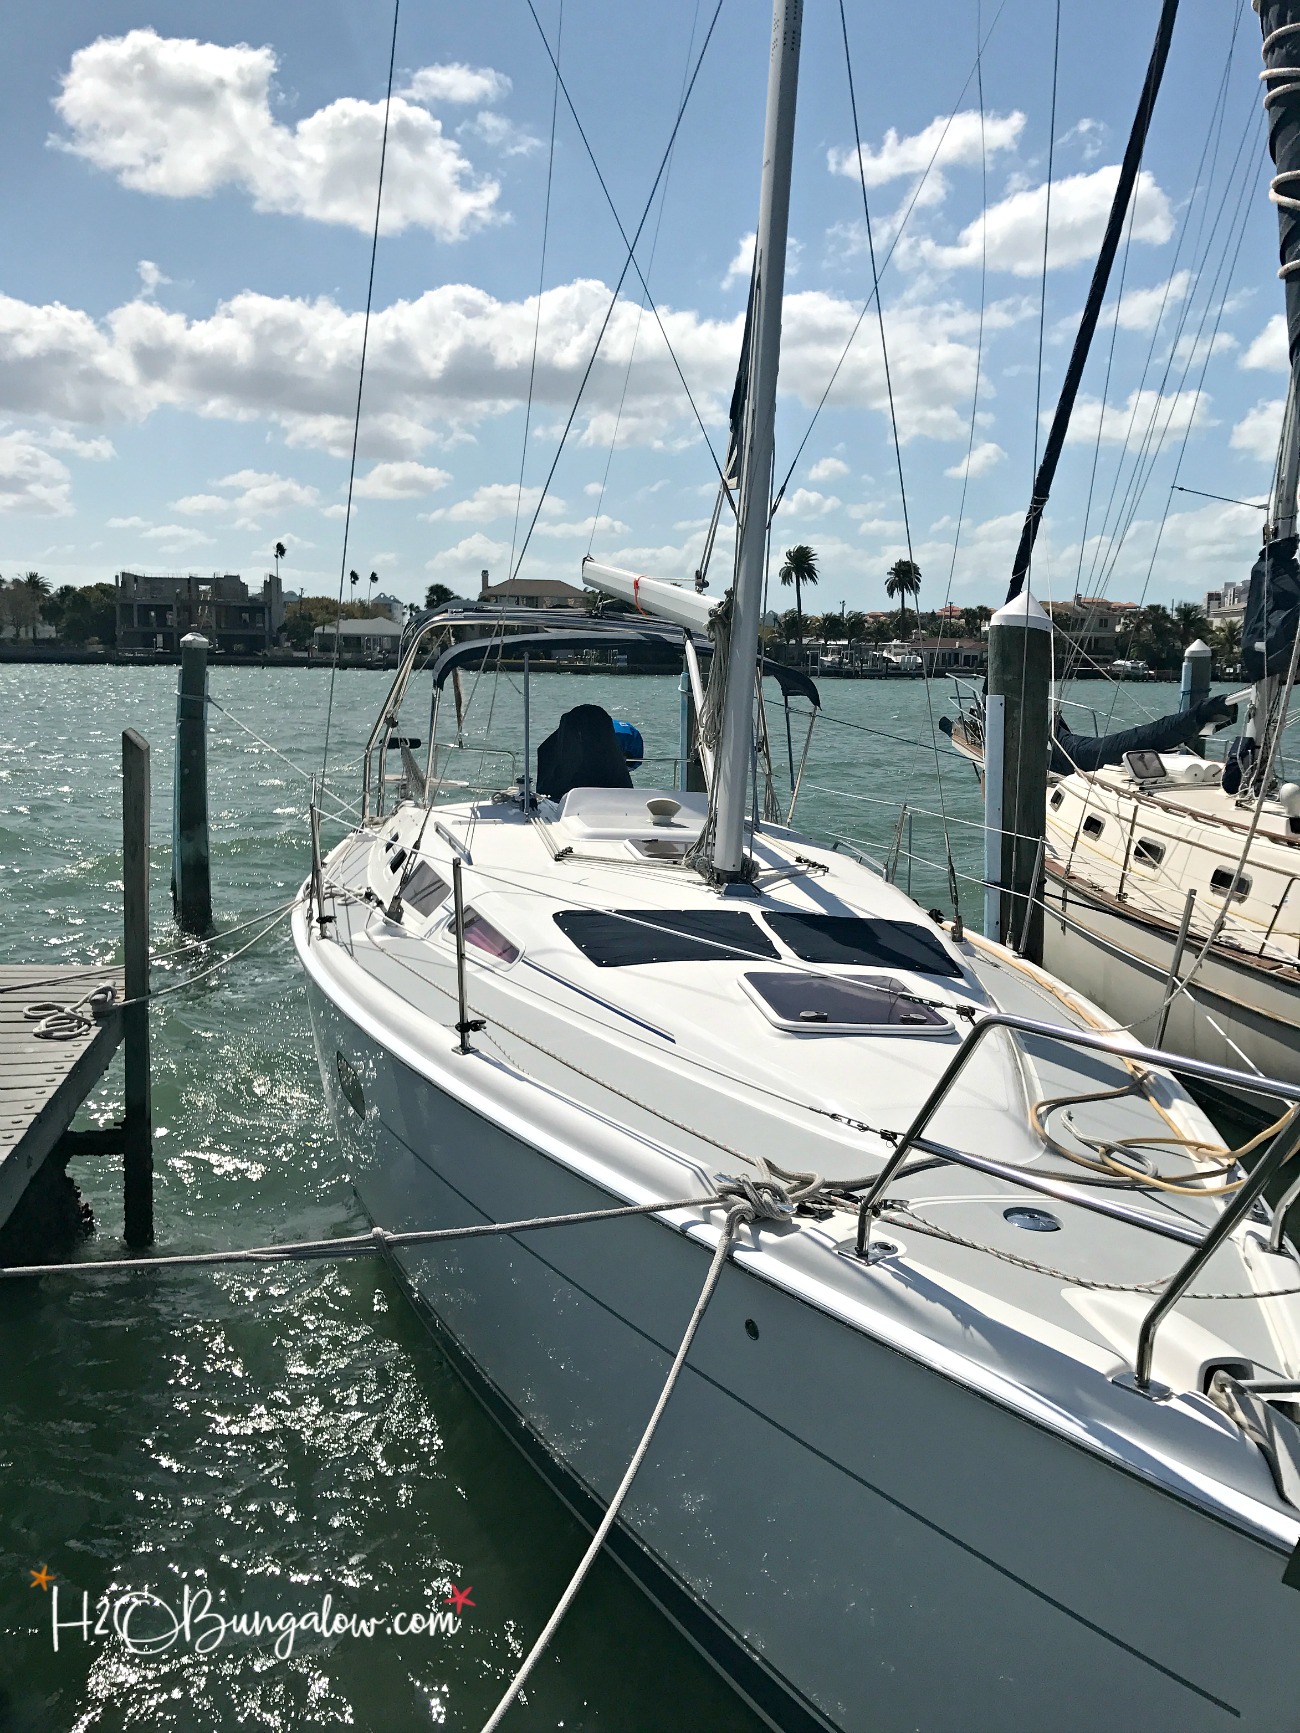 Rough seas and high winds had us change our plans on a weekend sail but we still had fun Visiting Clearwater Fl by boat and exploring this cute beach town. 